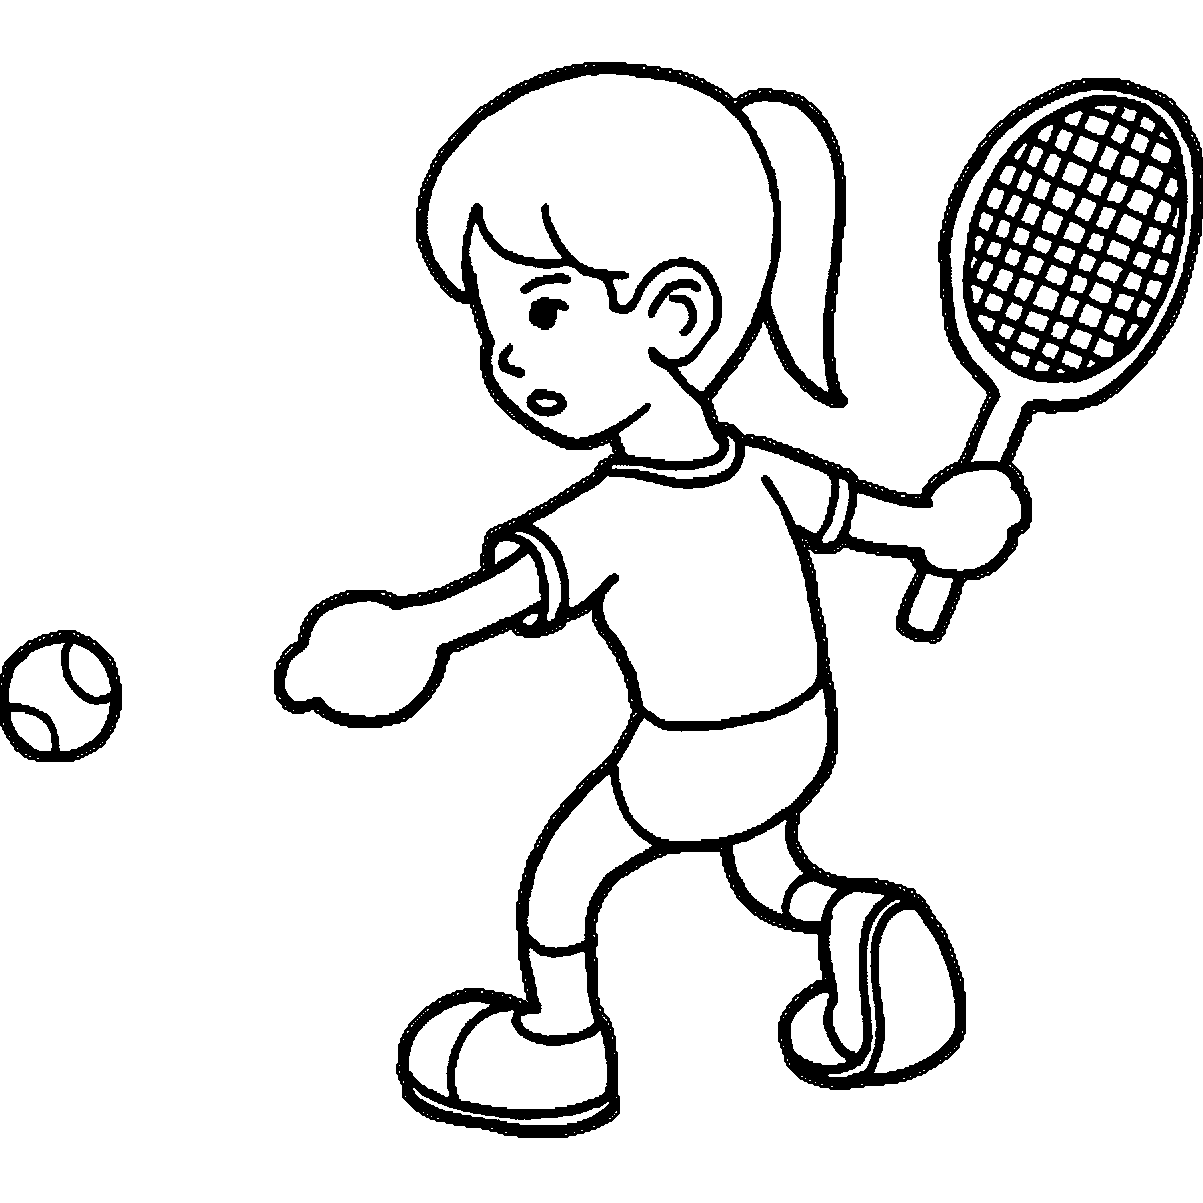 Badminton clipart colouring page. Playing tennis coloring pages